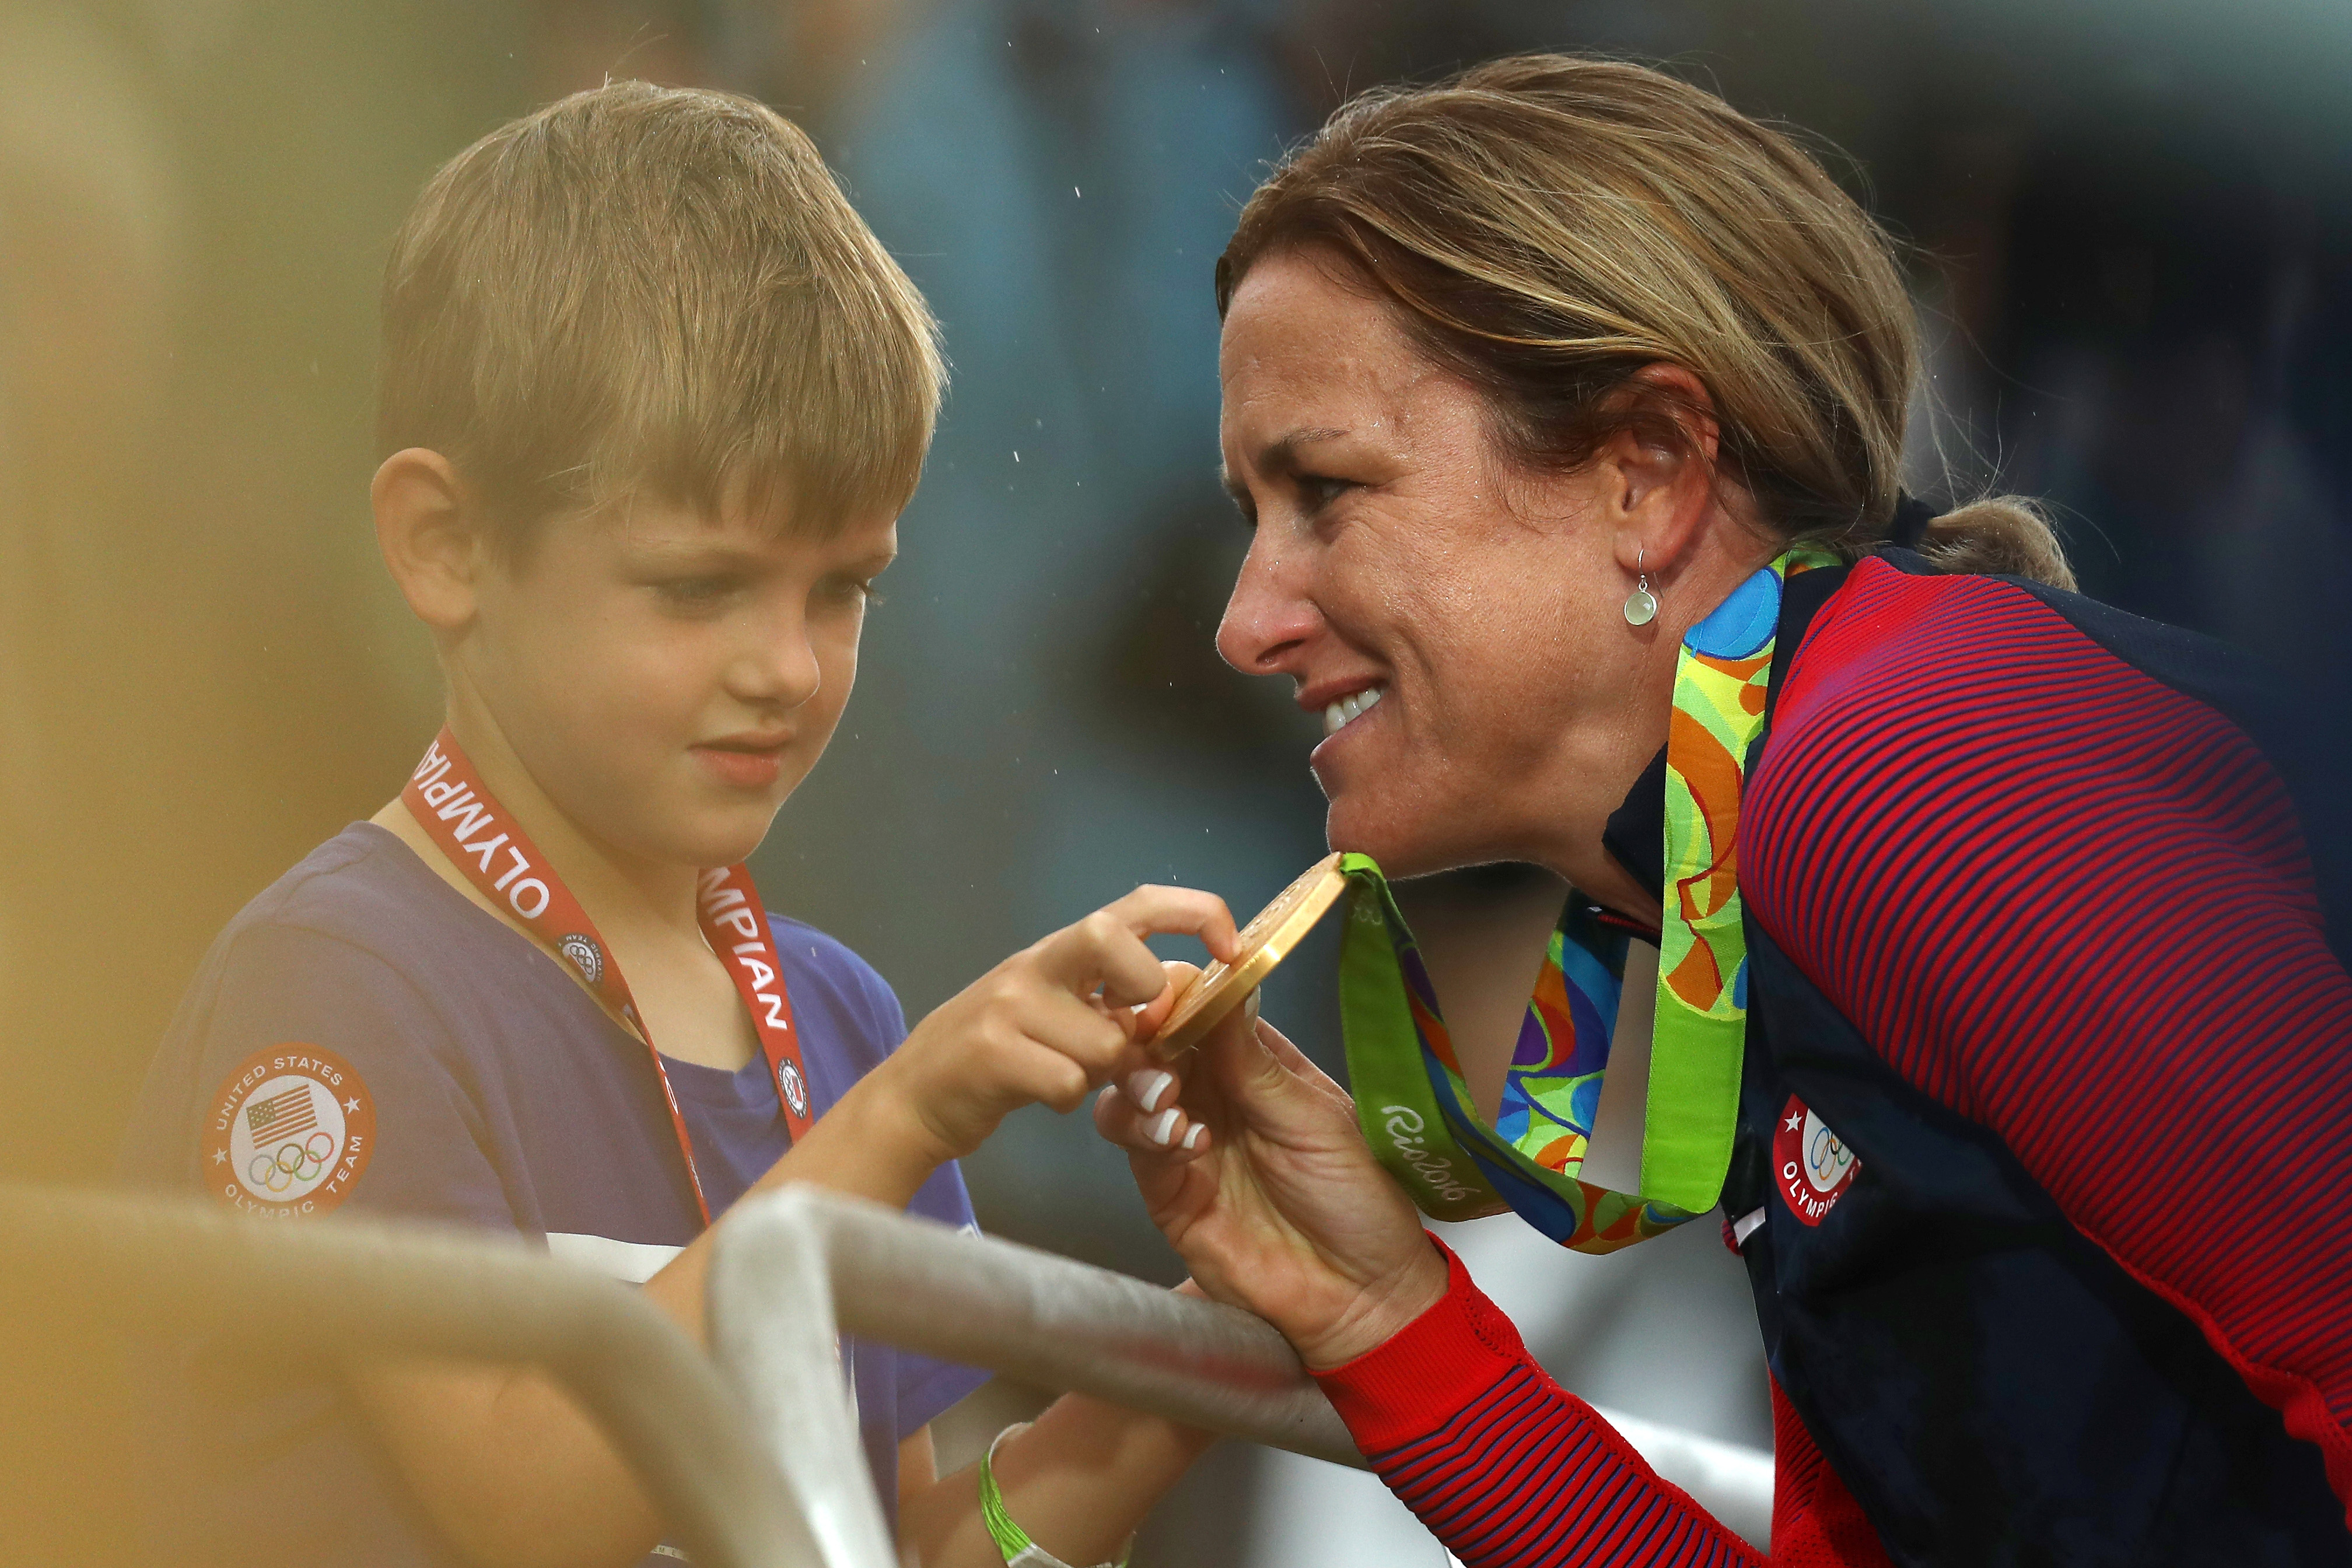 Rio Olympic medal-winners on Day 5 : Stunning comeback by Kristin Armstrong; Uchimura shines